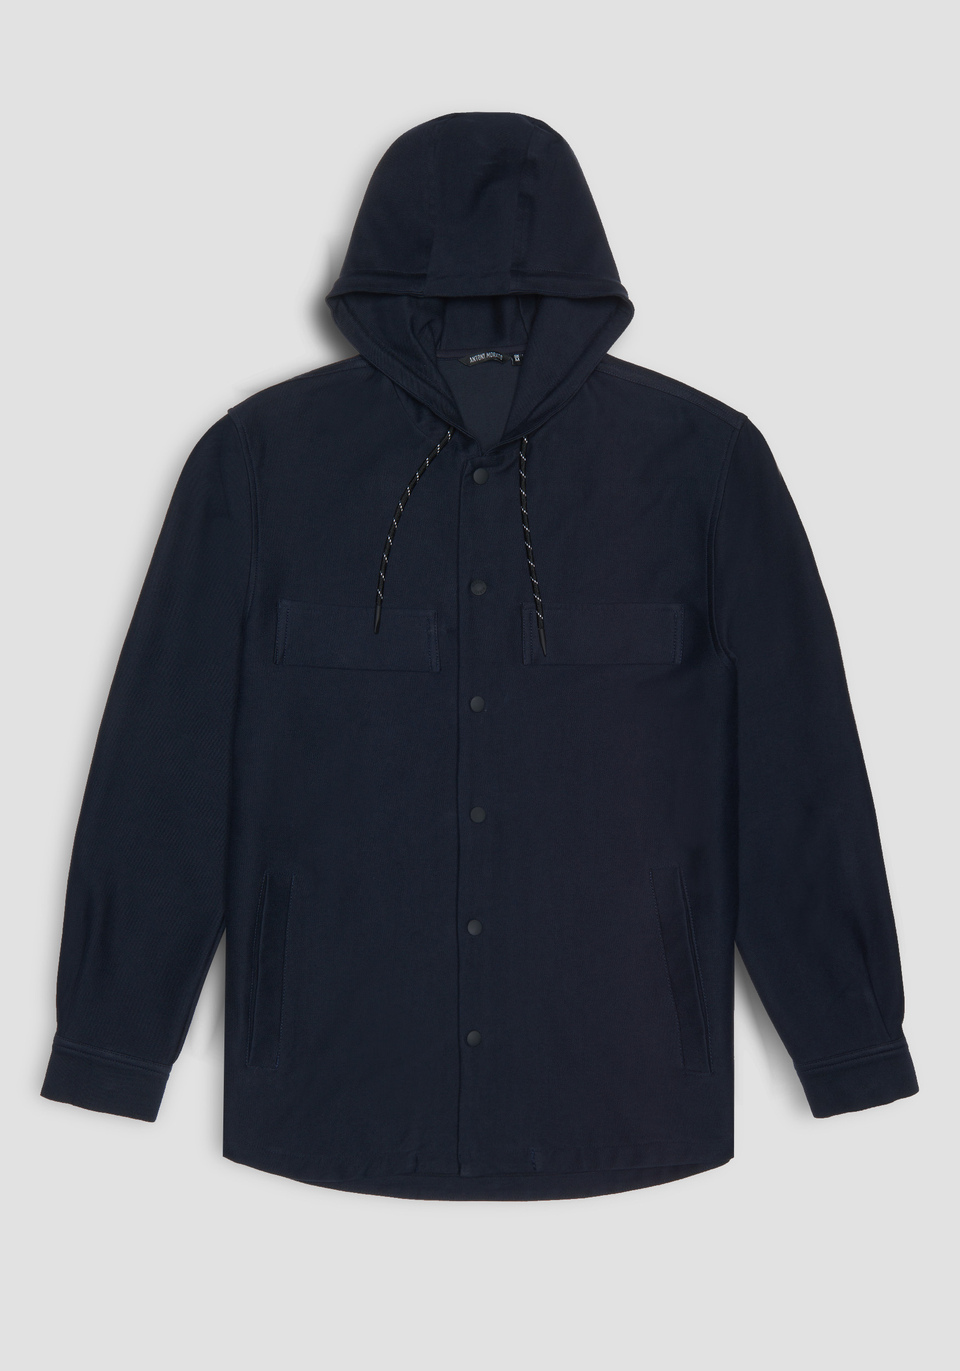 OVERSIZE SHIRT IN COTTON TWILL WITH HOOD - Antony Morato Online Shop